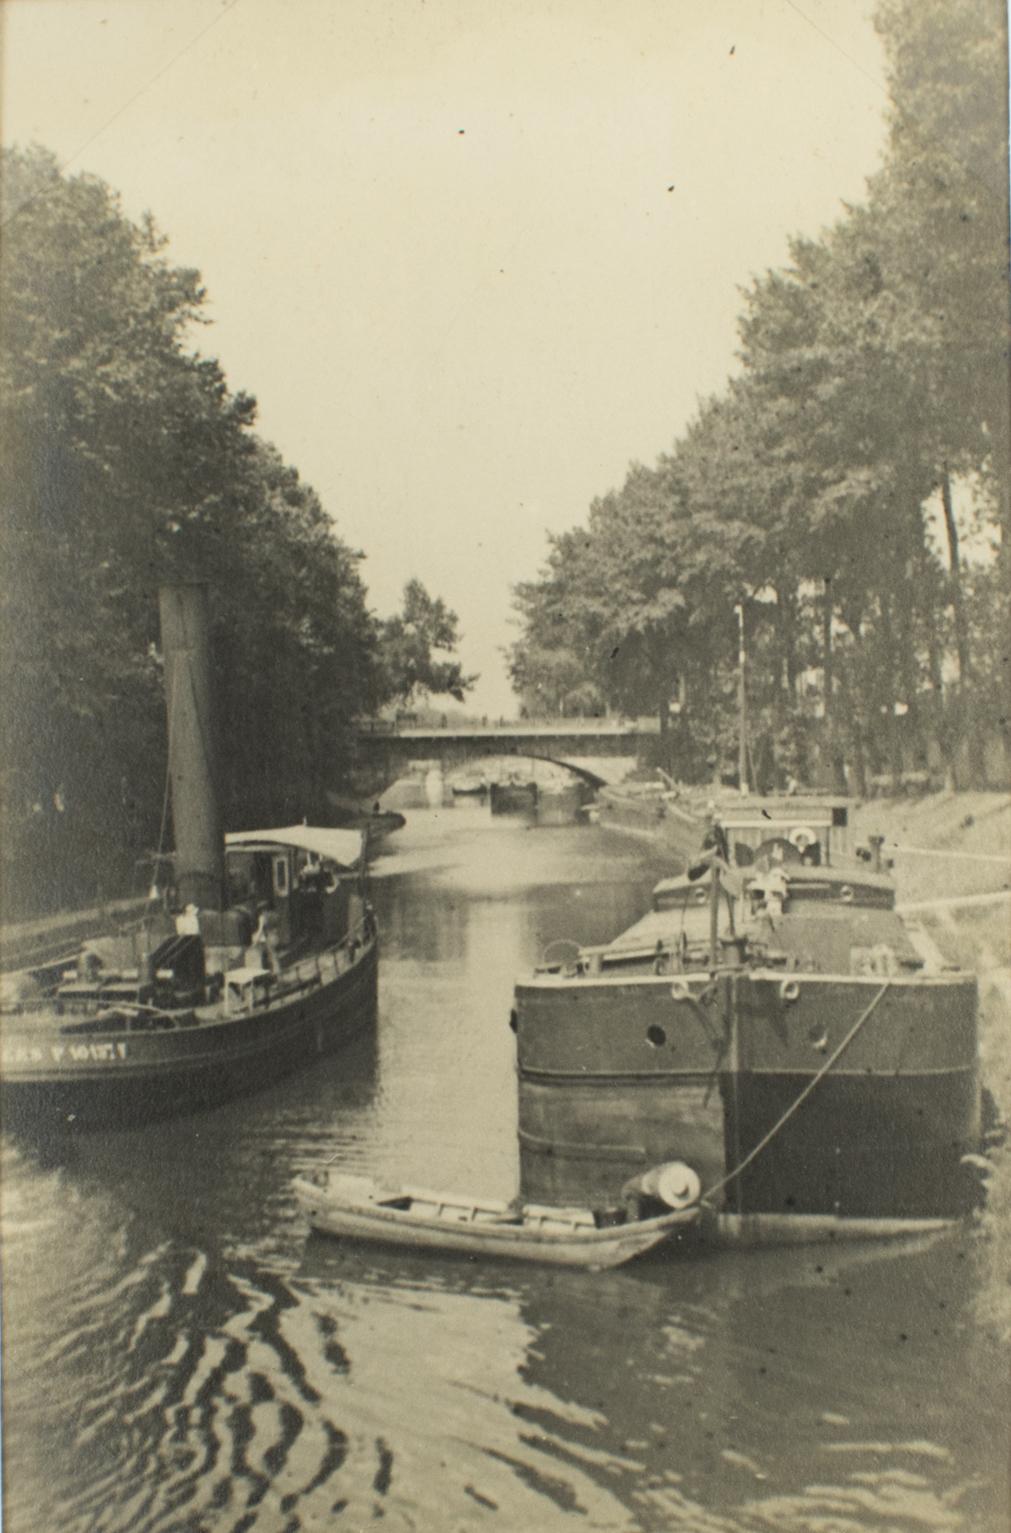 A unique original silver gelatin black and white photography. In the eastern suburb of Paris, France, in June 1926. 
A view of the canal with its barge boats in Charenton le Pont, an eastern suburb of Paris, France.
Features:
Original Silver Gelatin